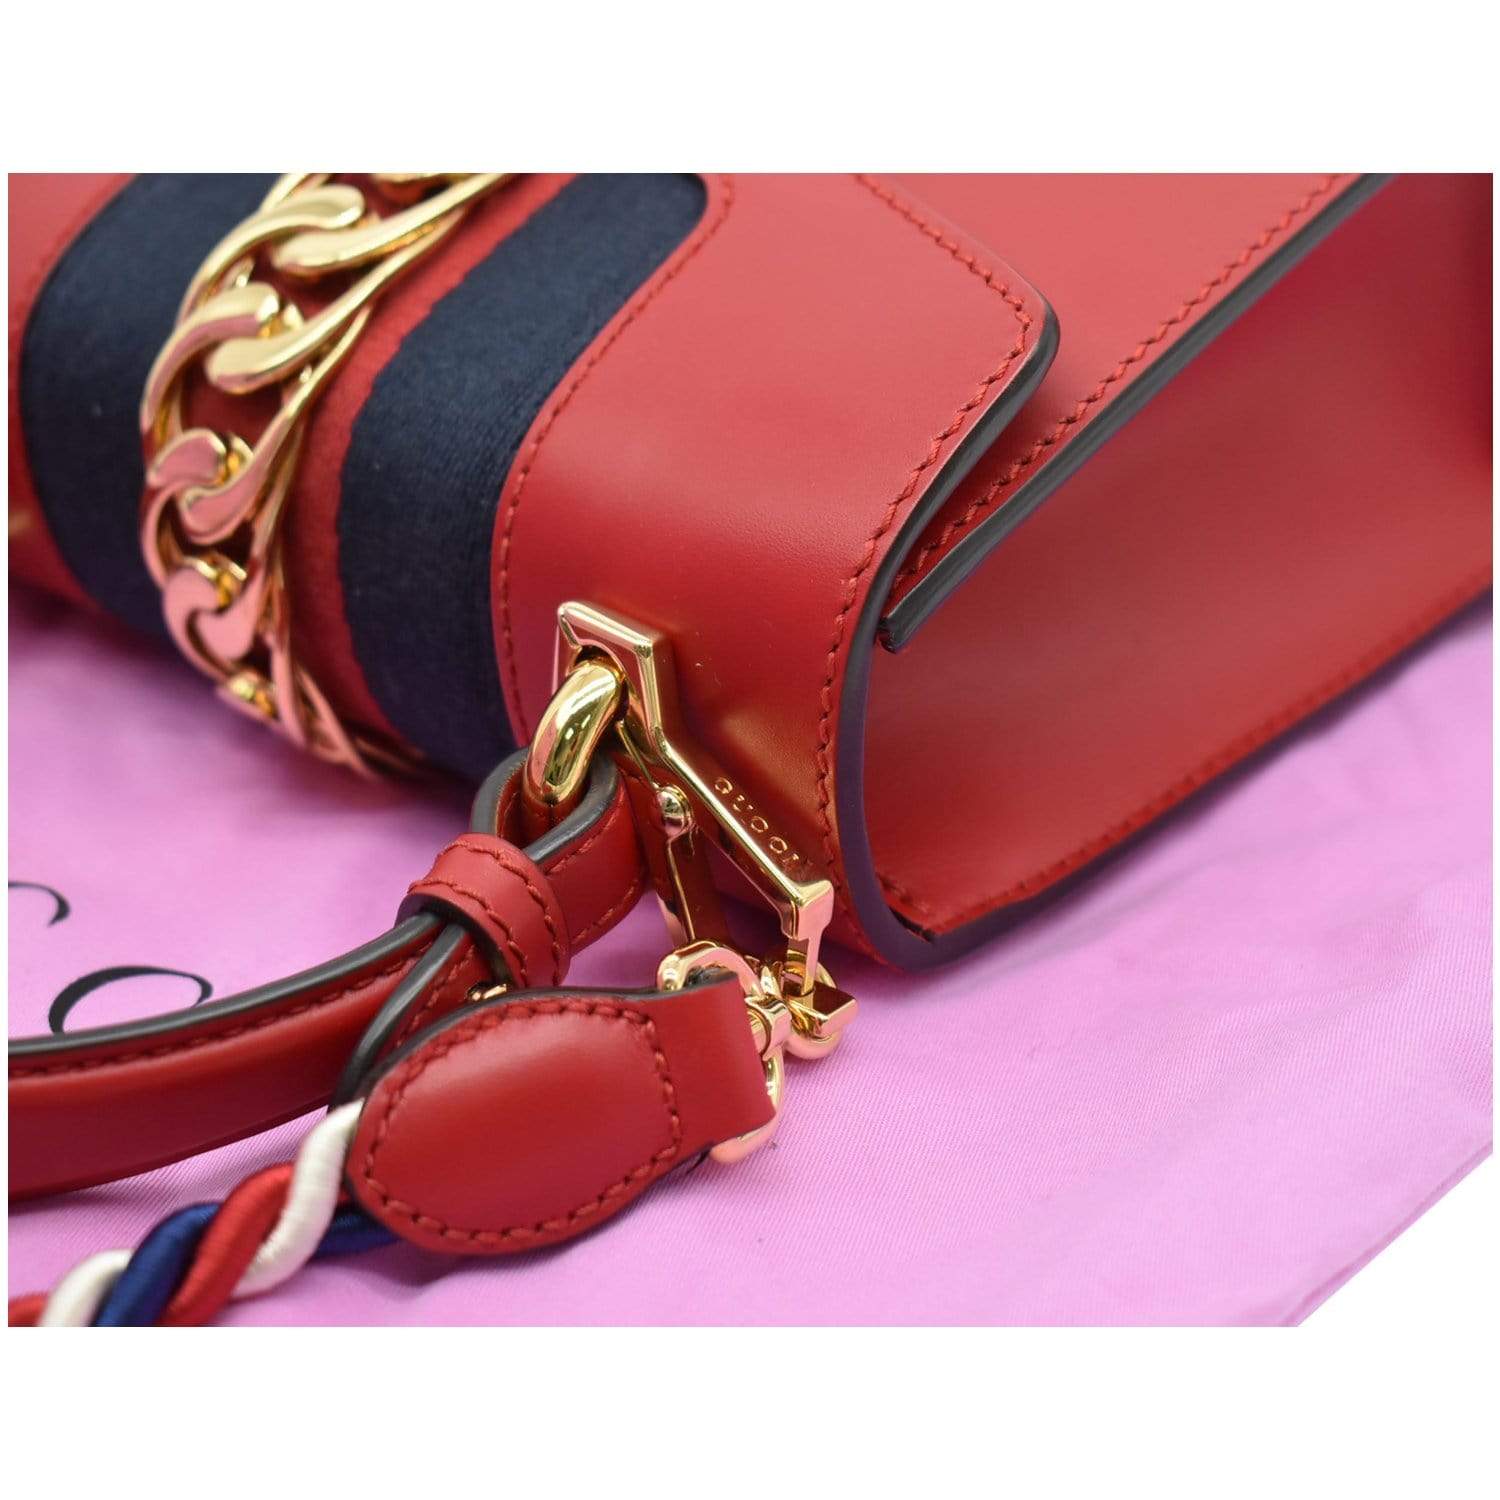 Gucci Red Leather Small Sylvie Web Shoulder Bag Gucci